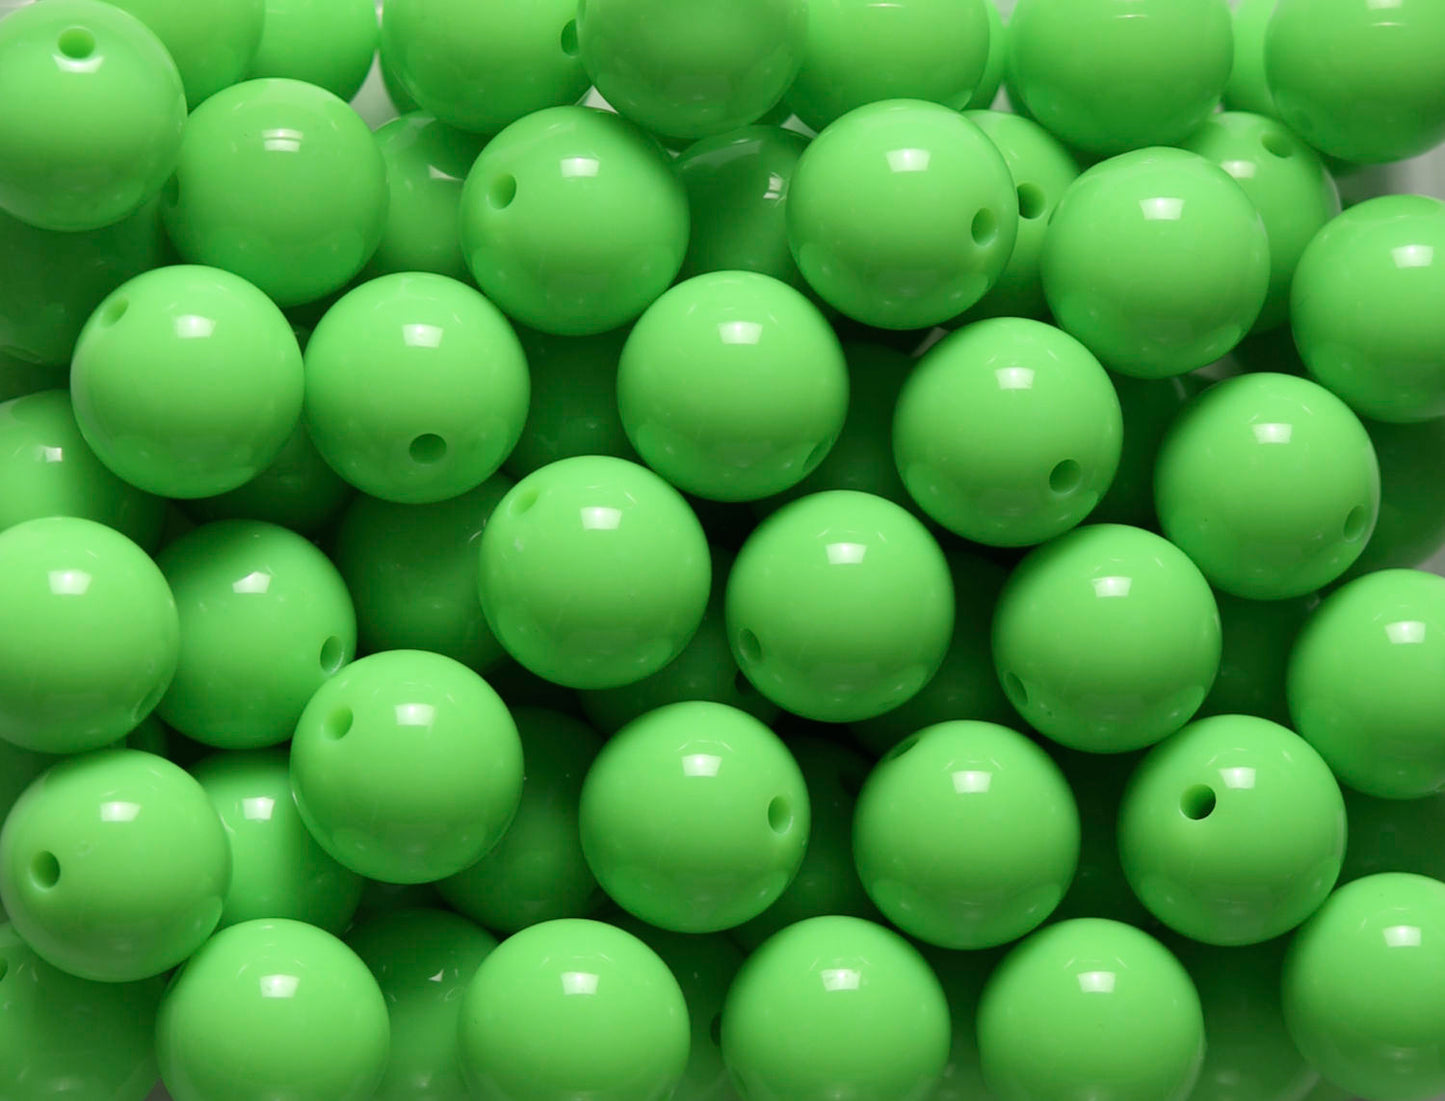 Lime Green 20mm Solid Bubblegum Beads for DIY Jewelry by WhimsyandPOP